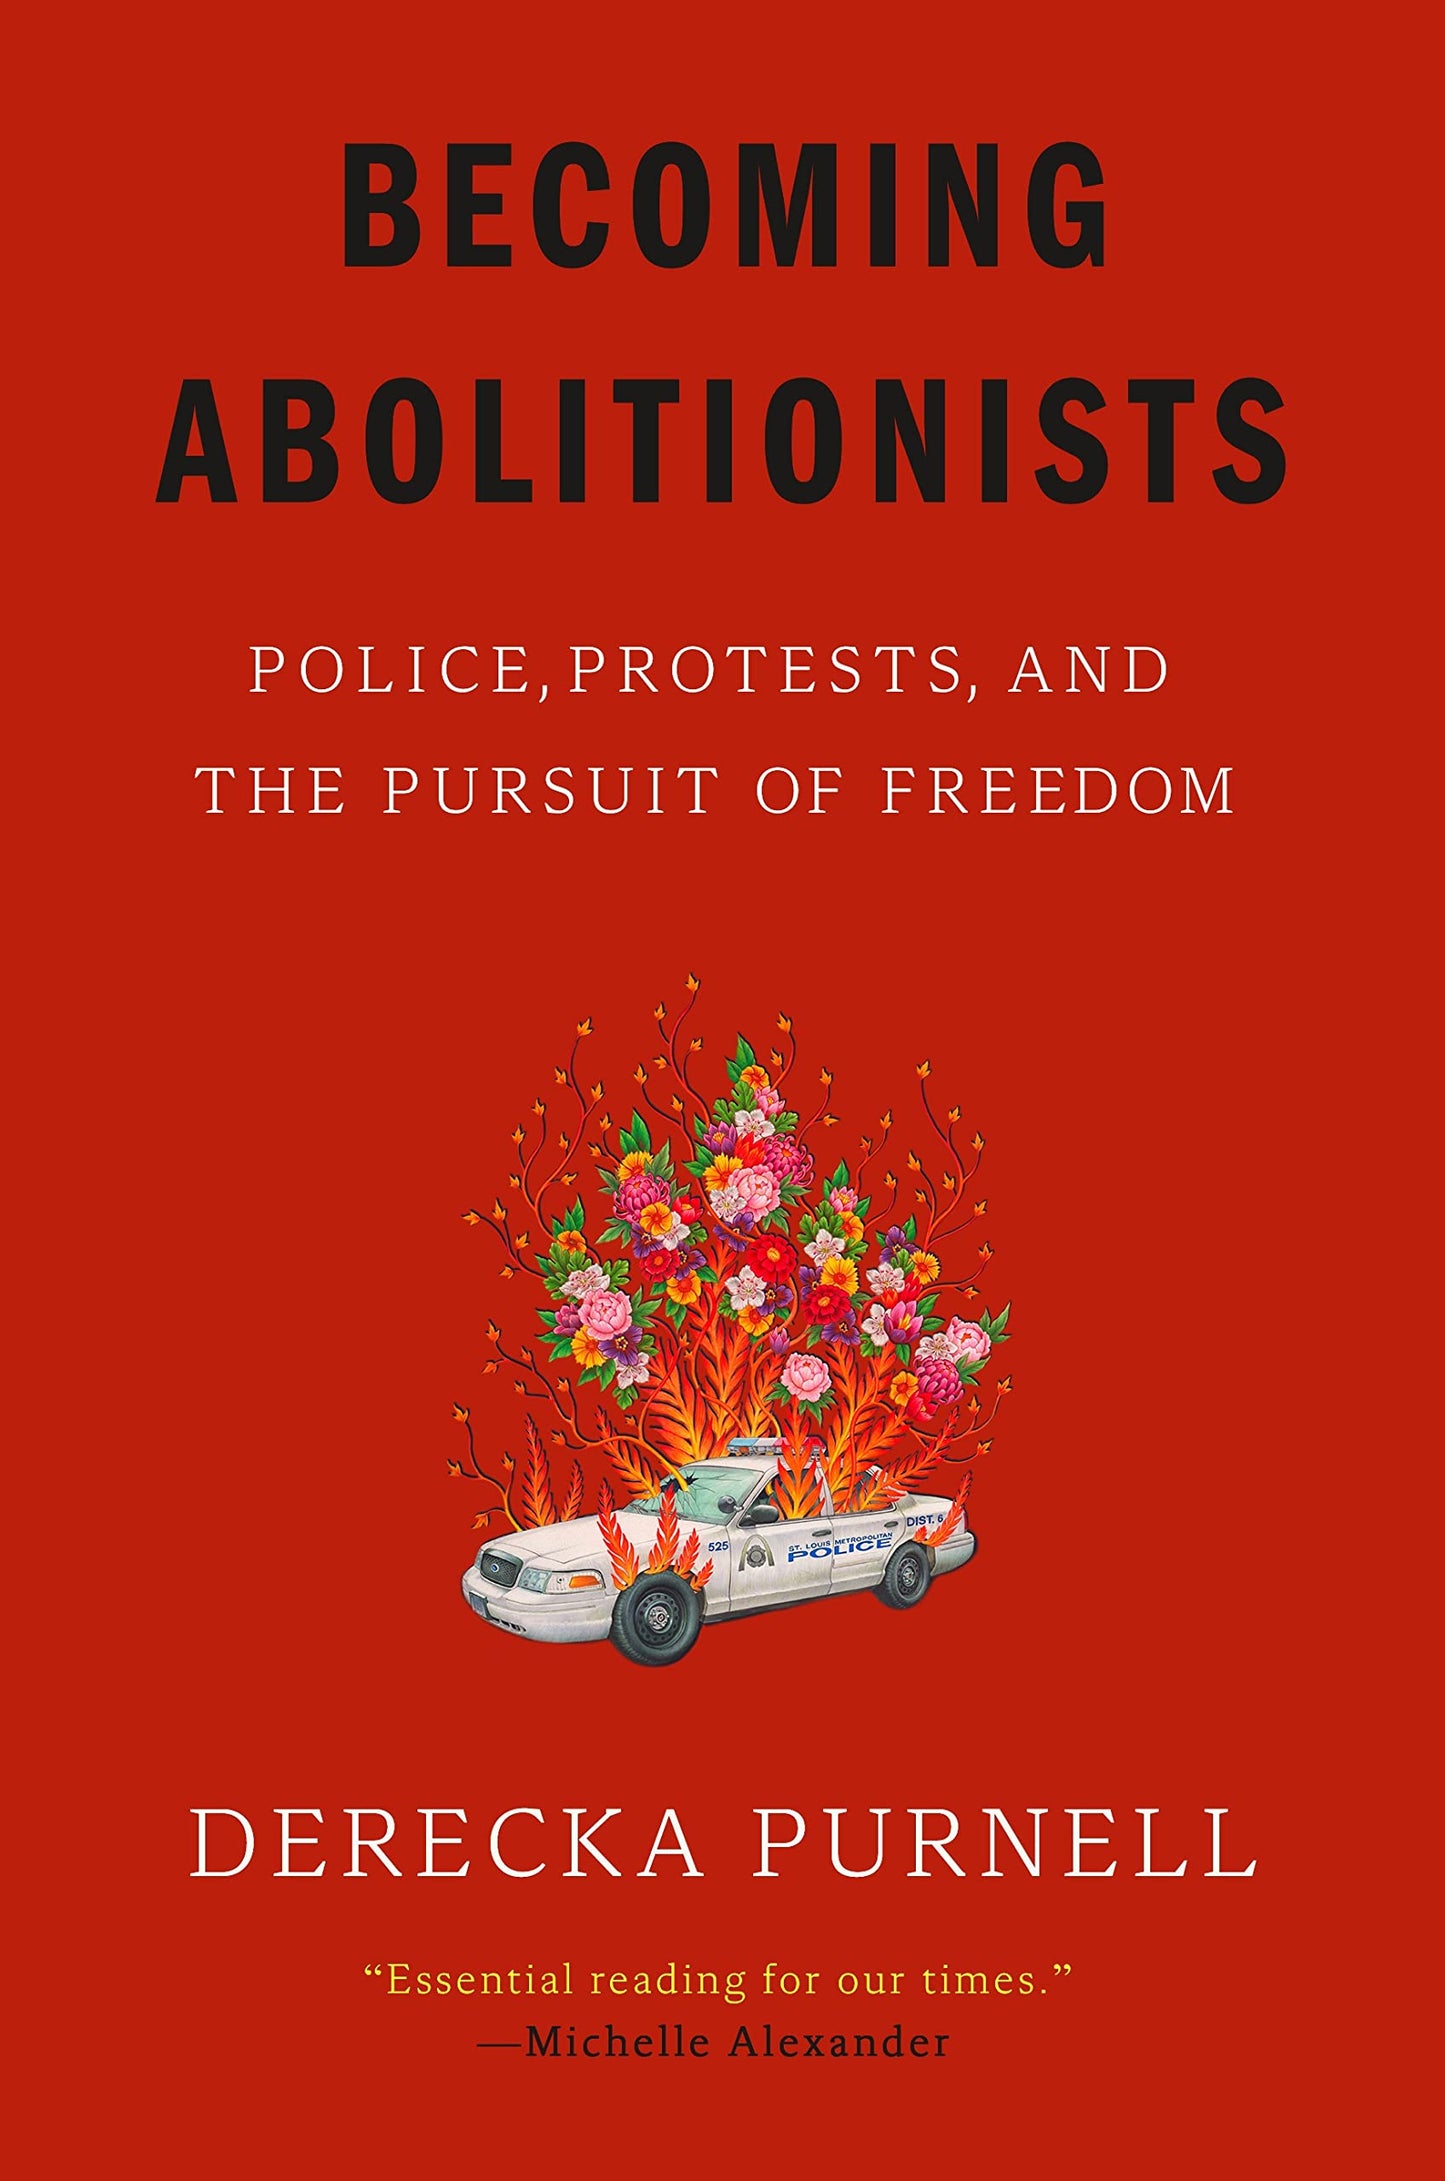 Becoming Abolitionists // Police, Protests, and the Pursuit of Freedom